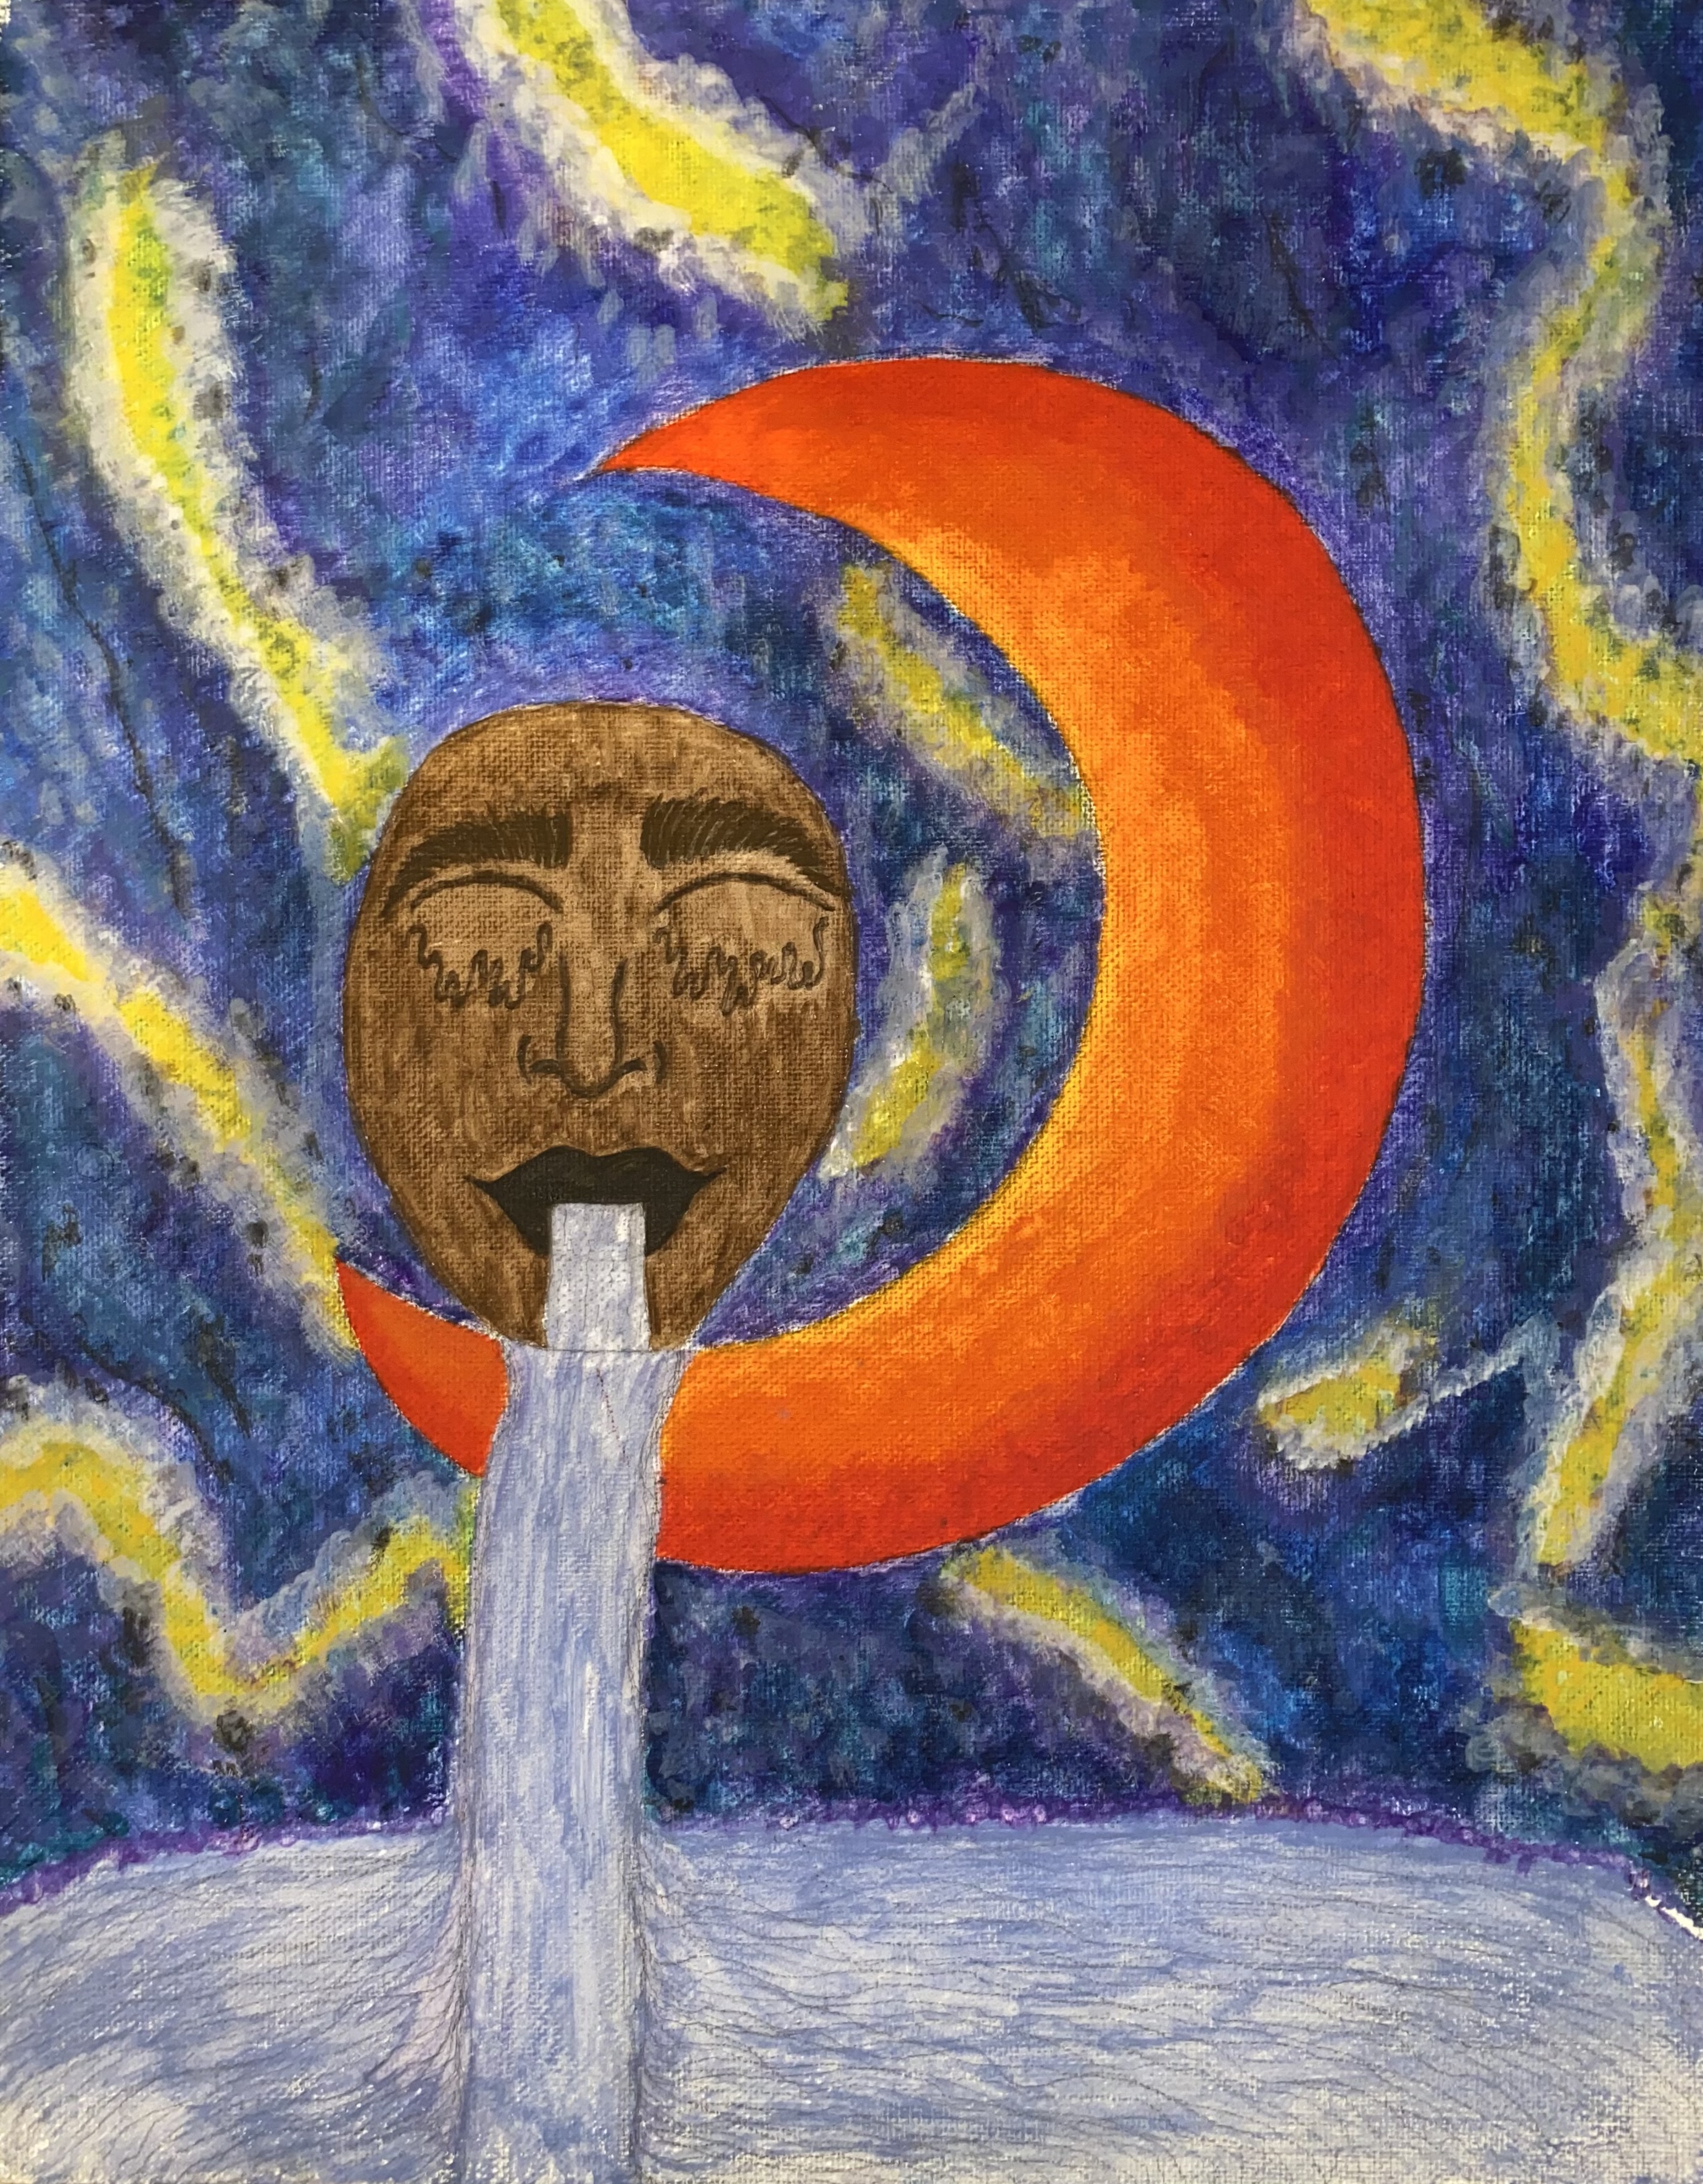 “Watering The Moon” 9.18.2020 Gouache & Acrylic on 11x14 Canvas, Pt.1 of Duo